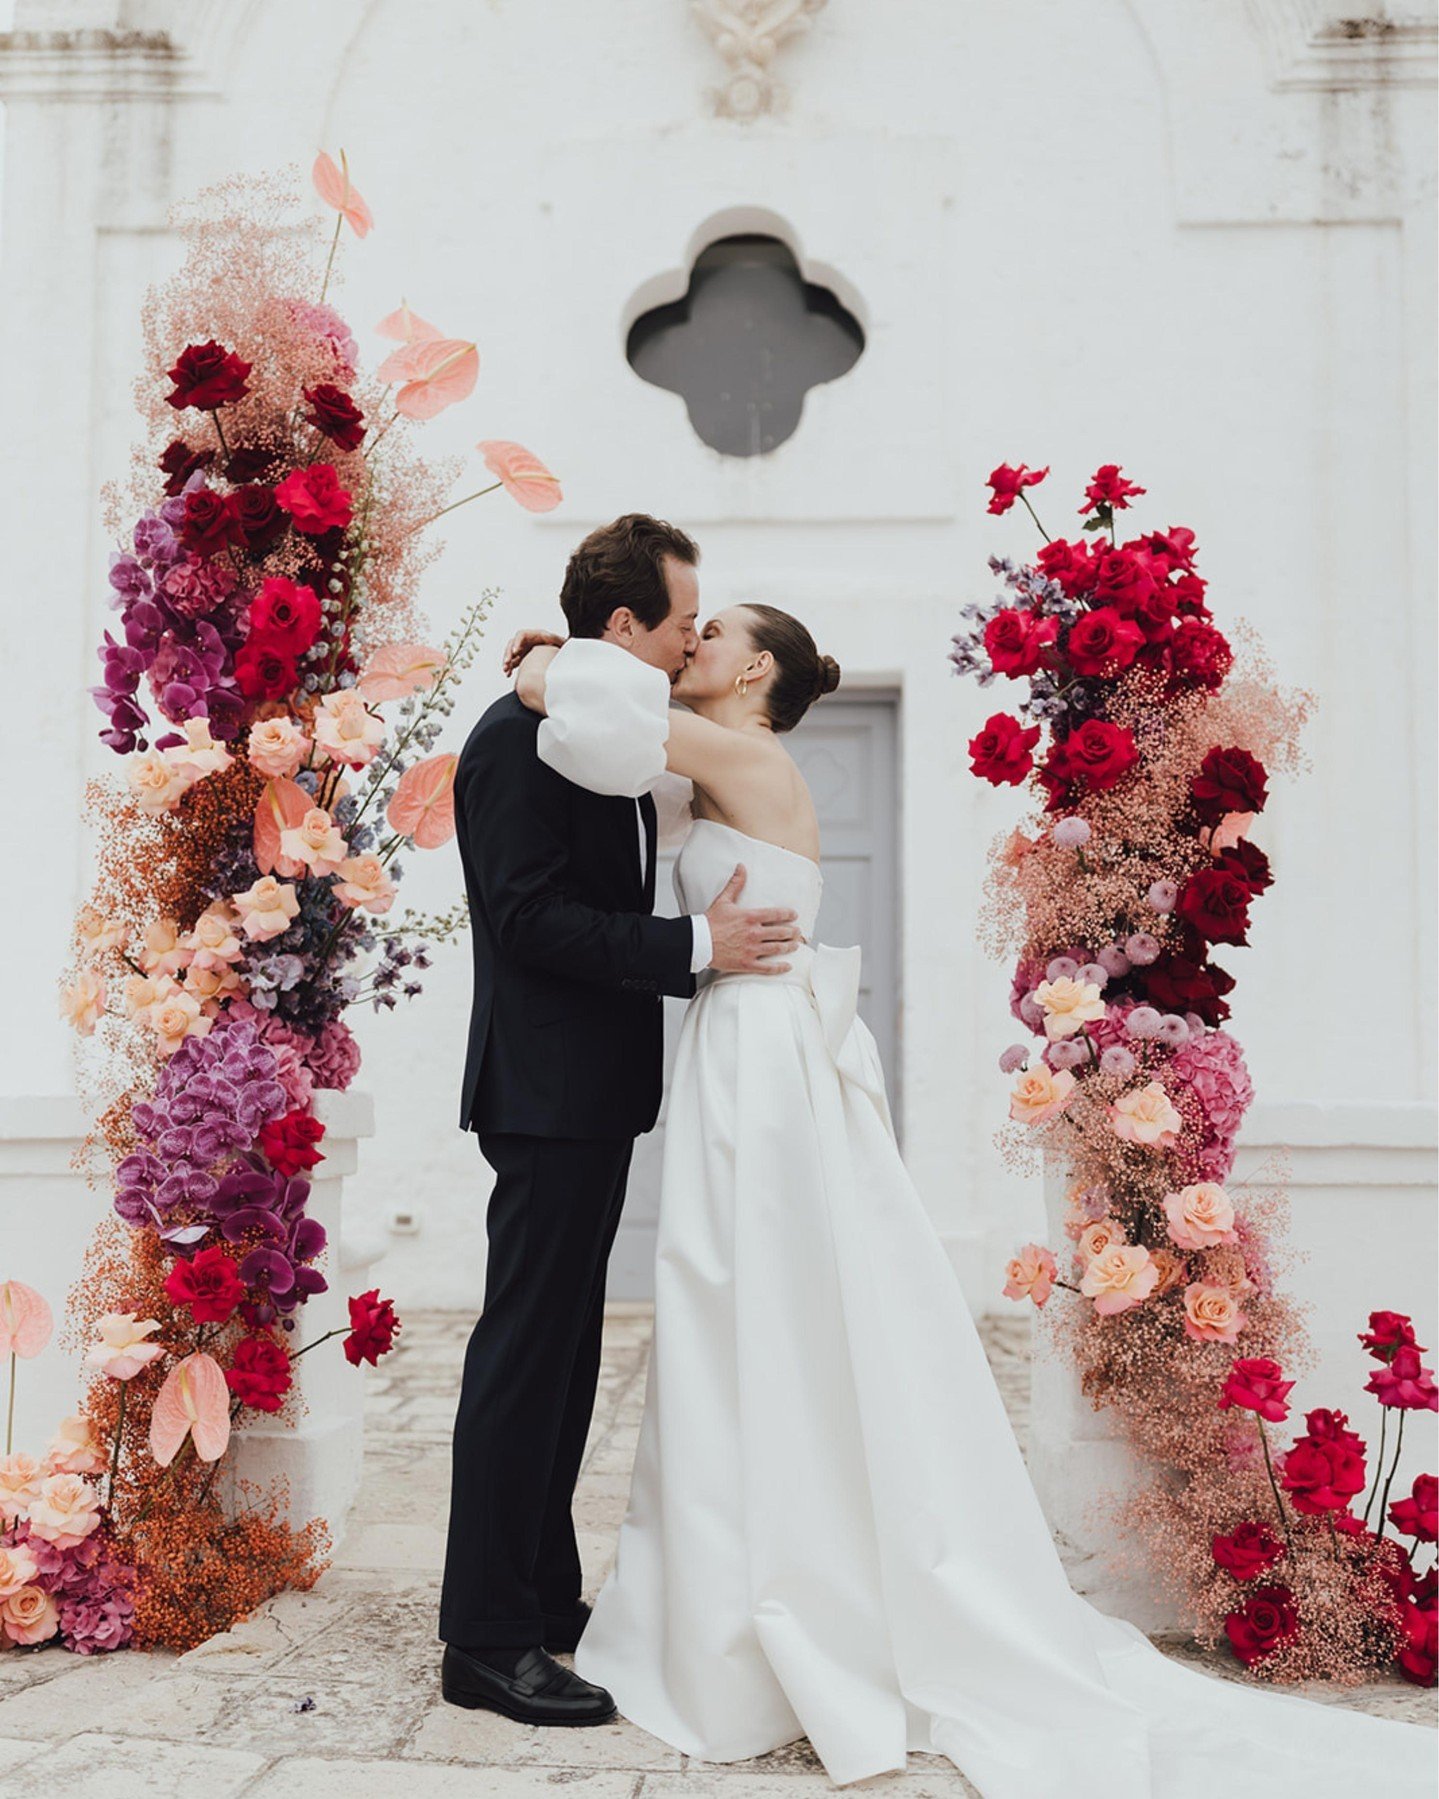 S &amp; D&rsquo;s love in BLOOM &mdash; A living canvas painted with the shades of their love&mdash;from soft pinks to bold cherry reds, deep crimsons, warm peaches, and a touch of muted orange.

Planning &amp; Design: @ido_events_
Photography: @juli